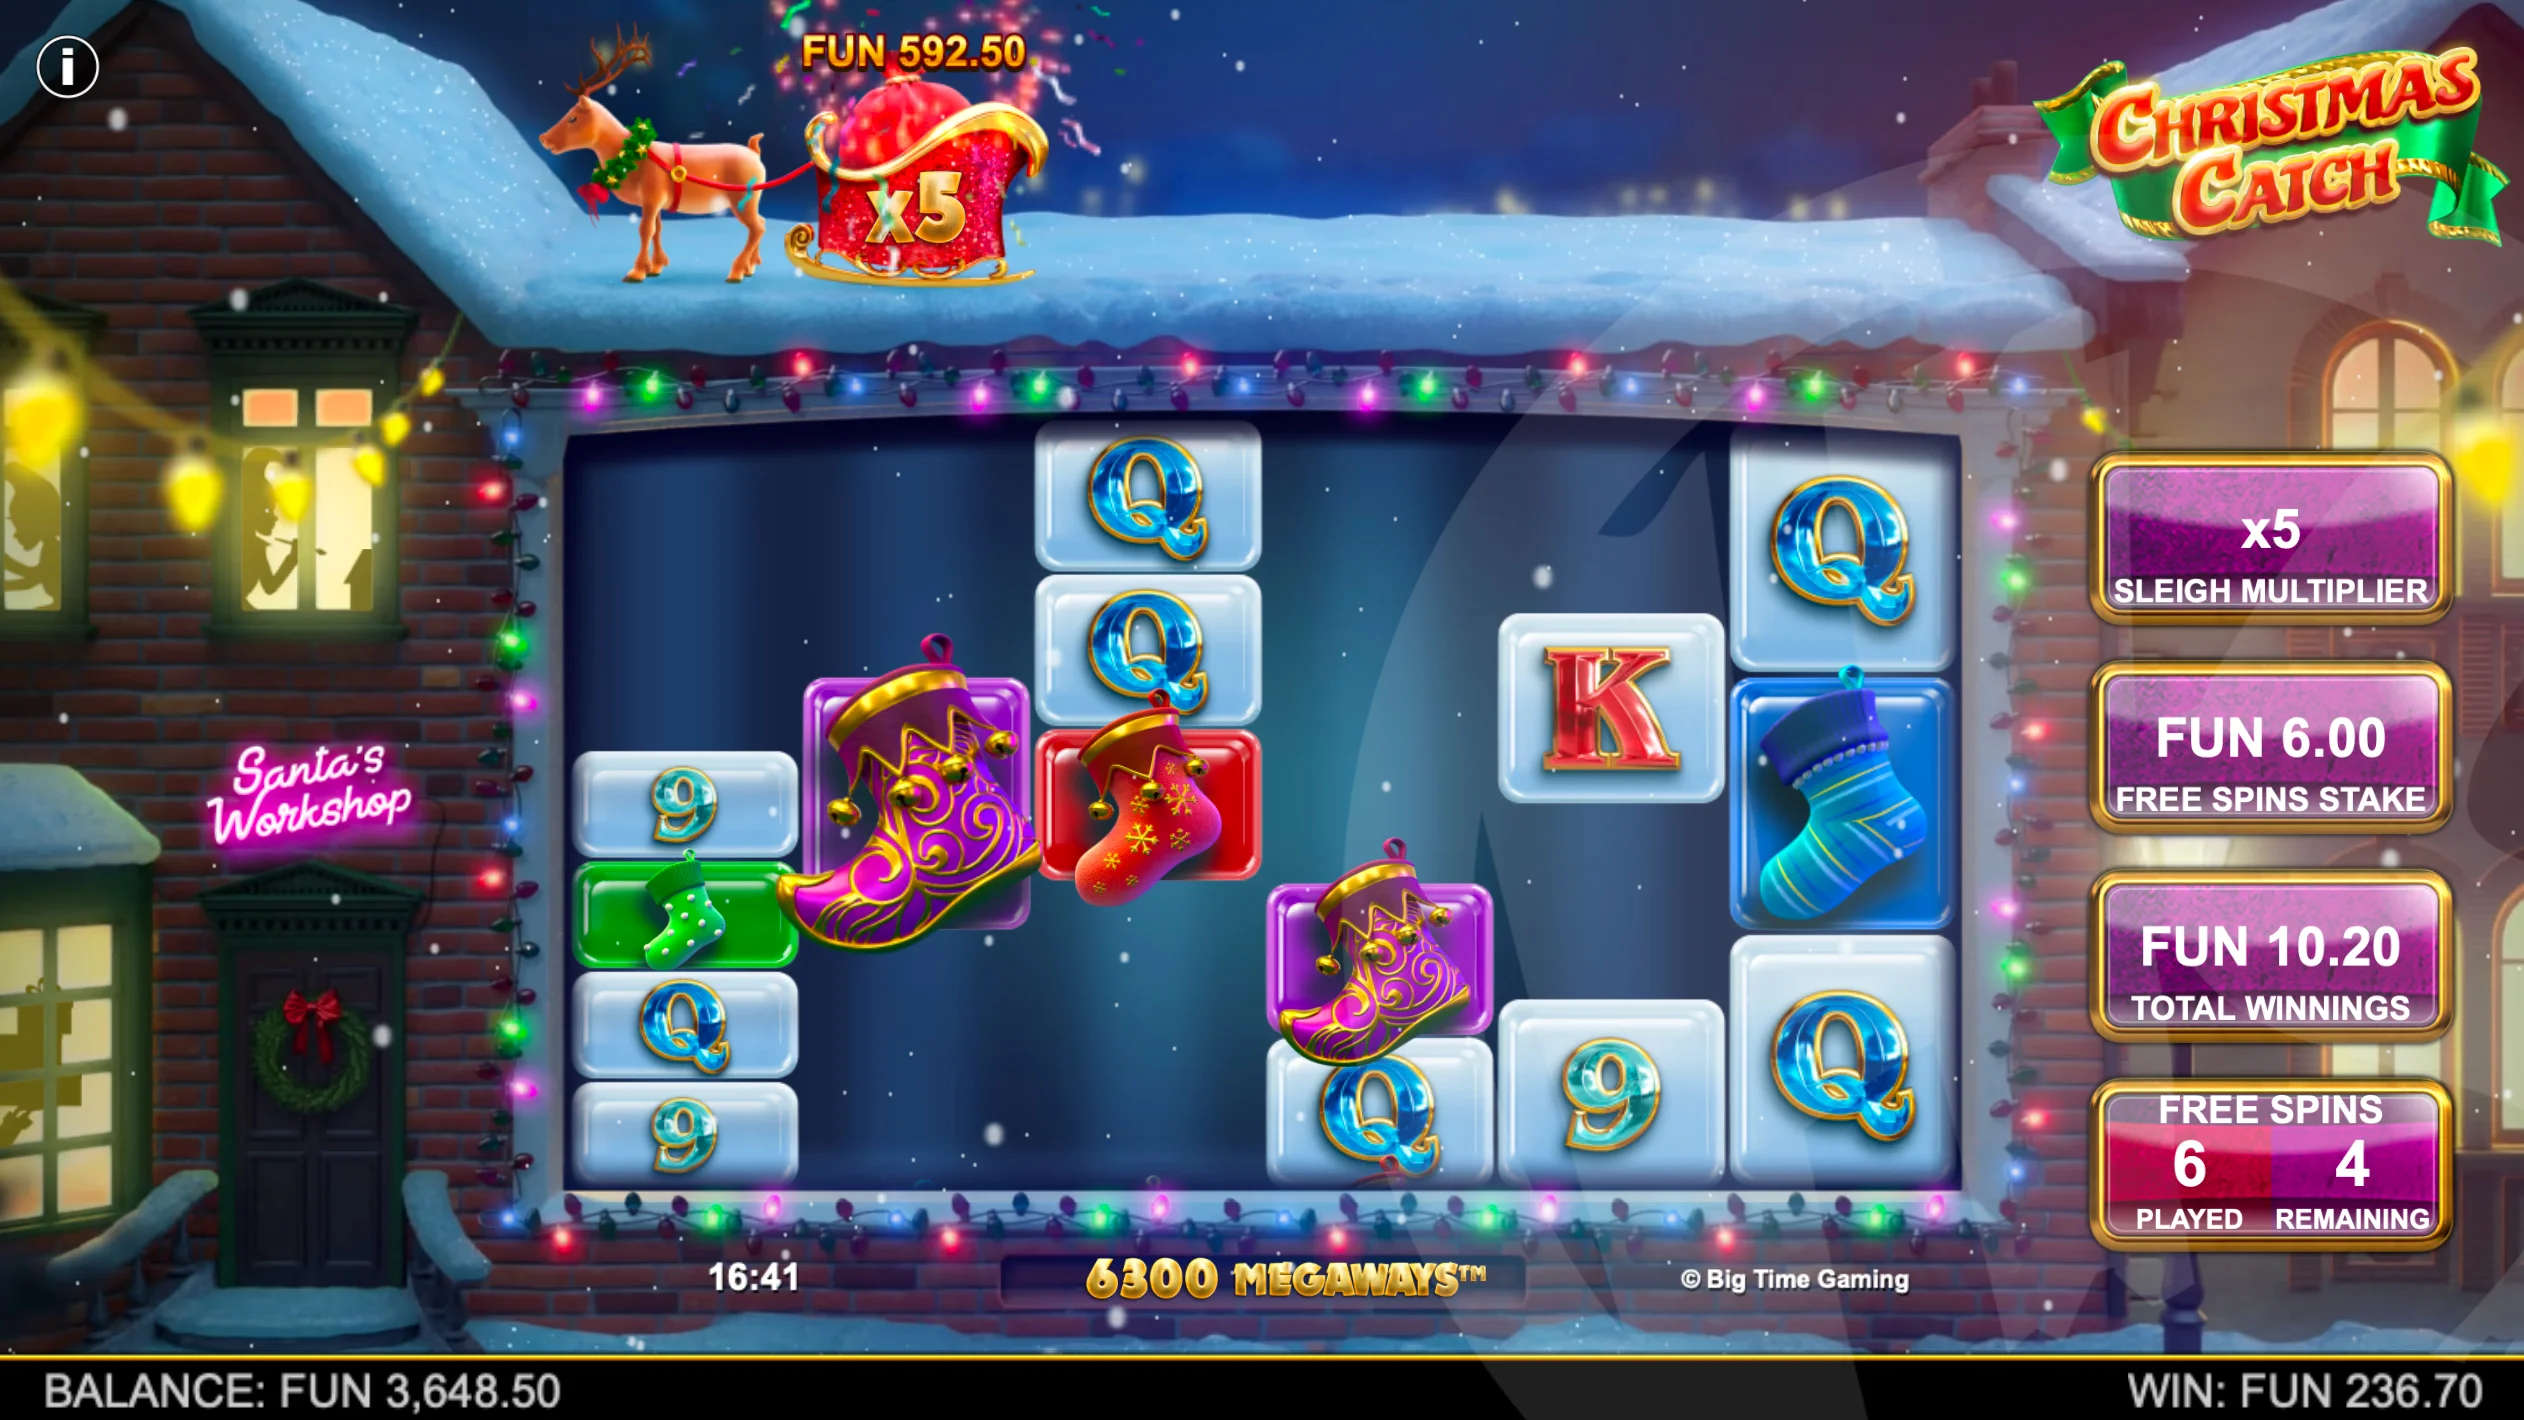 Sleigh Multipliers Increment in Free Spins and Do Not Reset